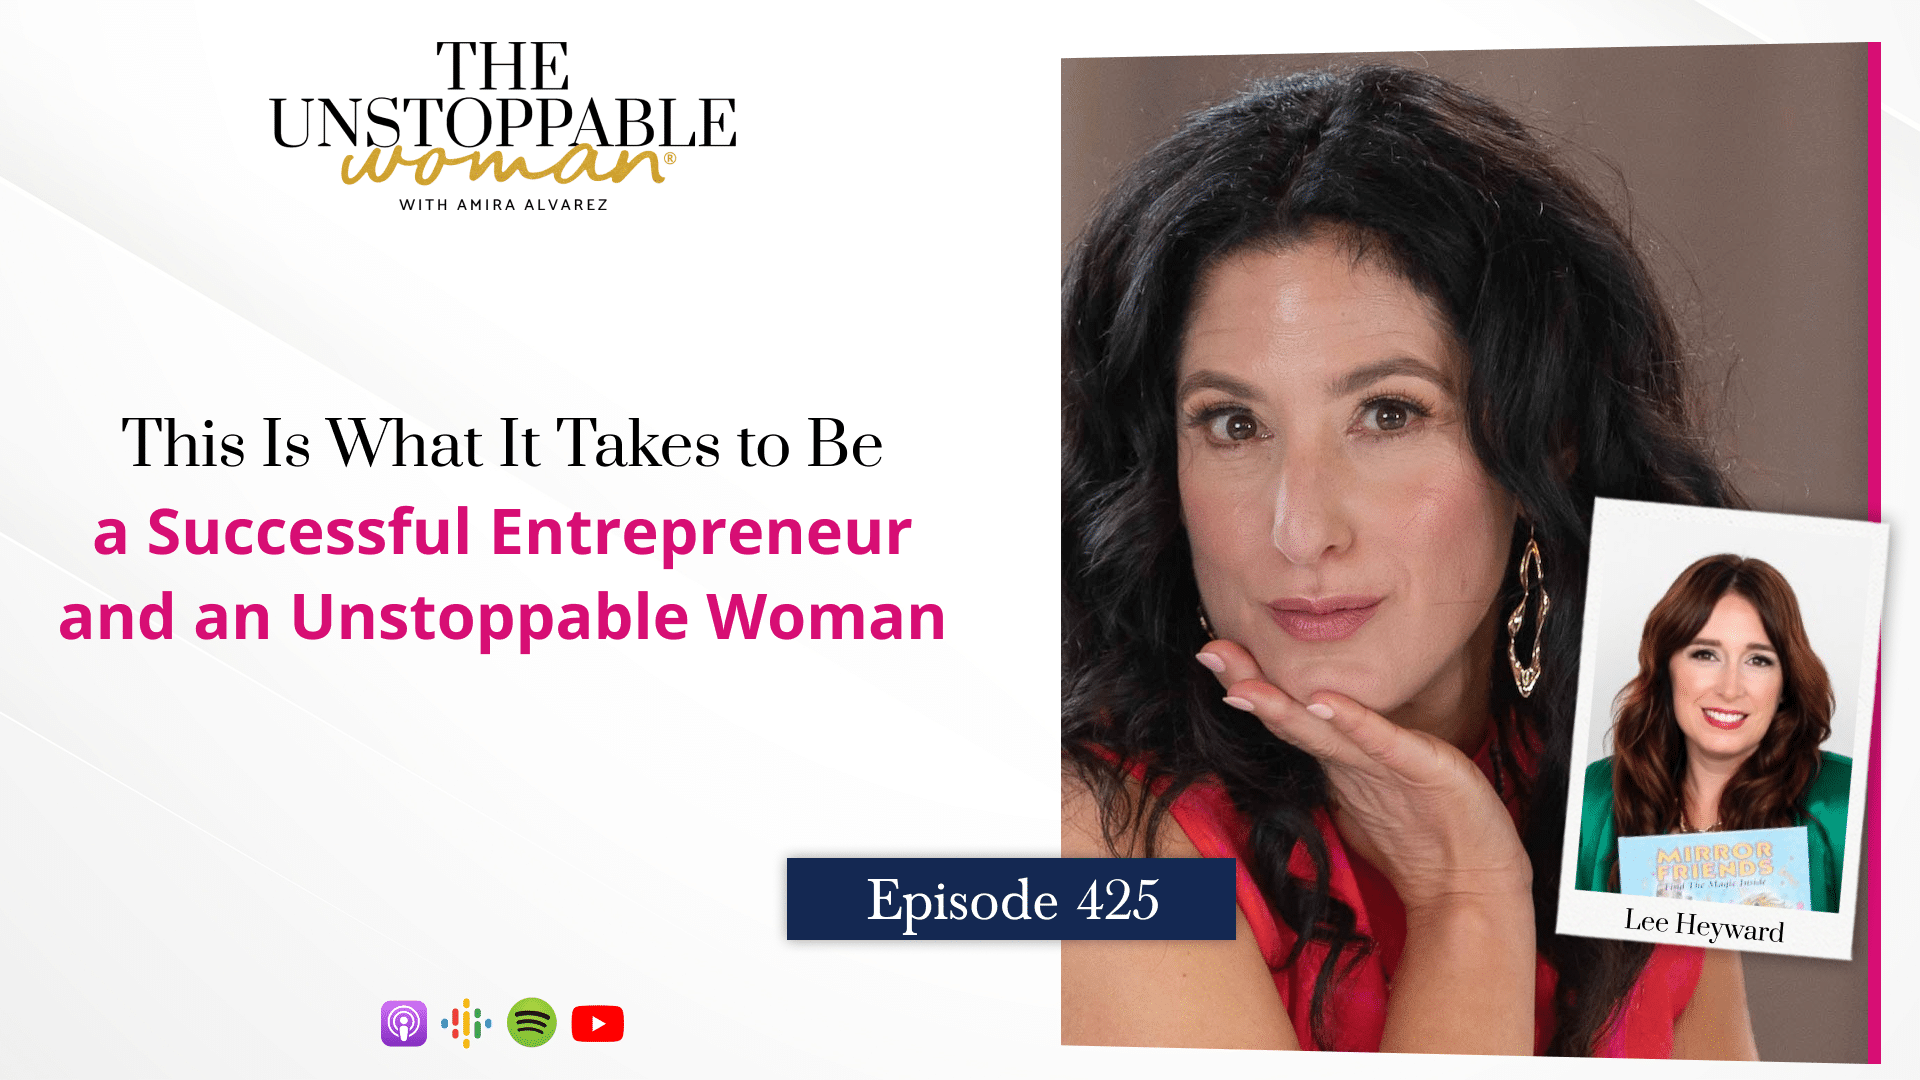 [Image: This Is What It Takes to Be a Successful Entrepreneur and an Unstoppable Woman | Lee Heyward]